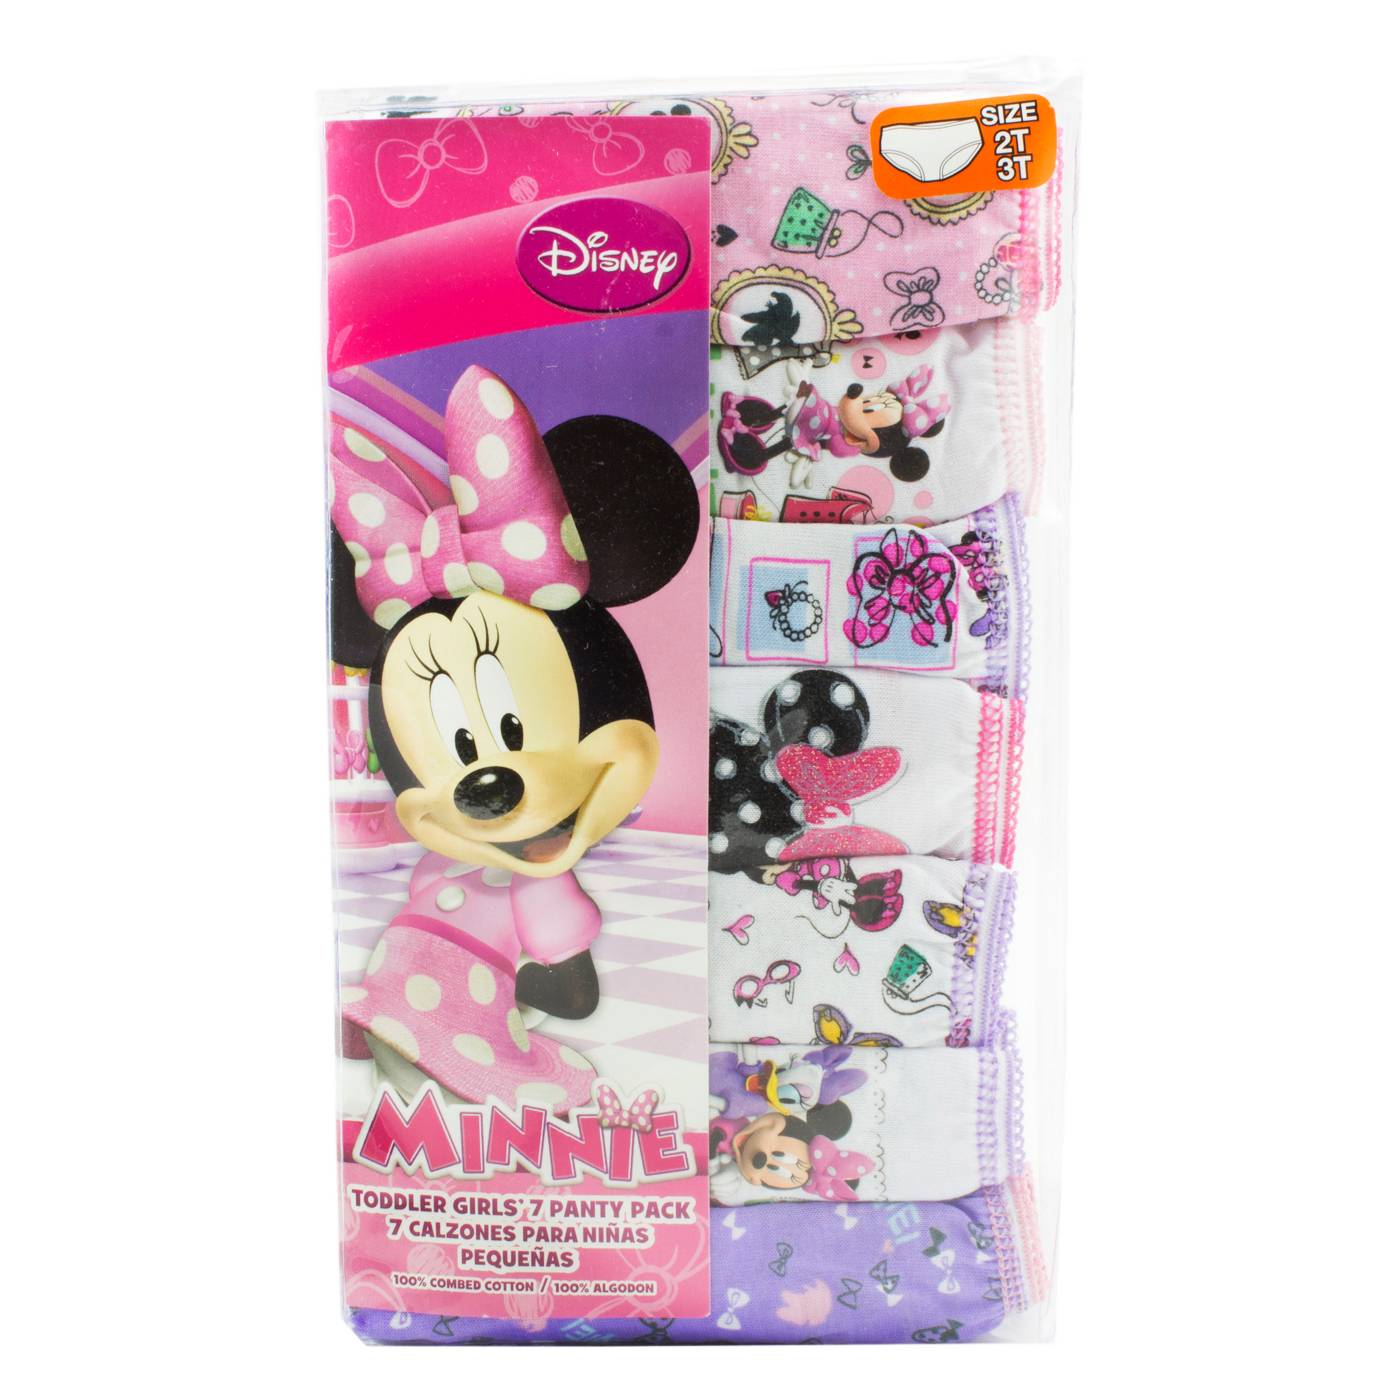 Minnie Mouse Panties Toddler/Little Girls' 7-pack Briefs Sizes 2T